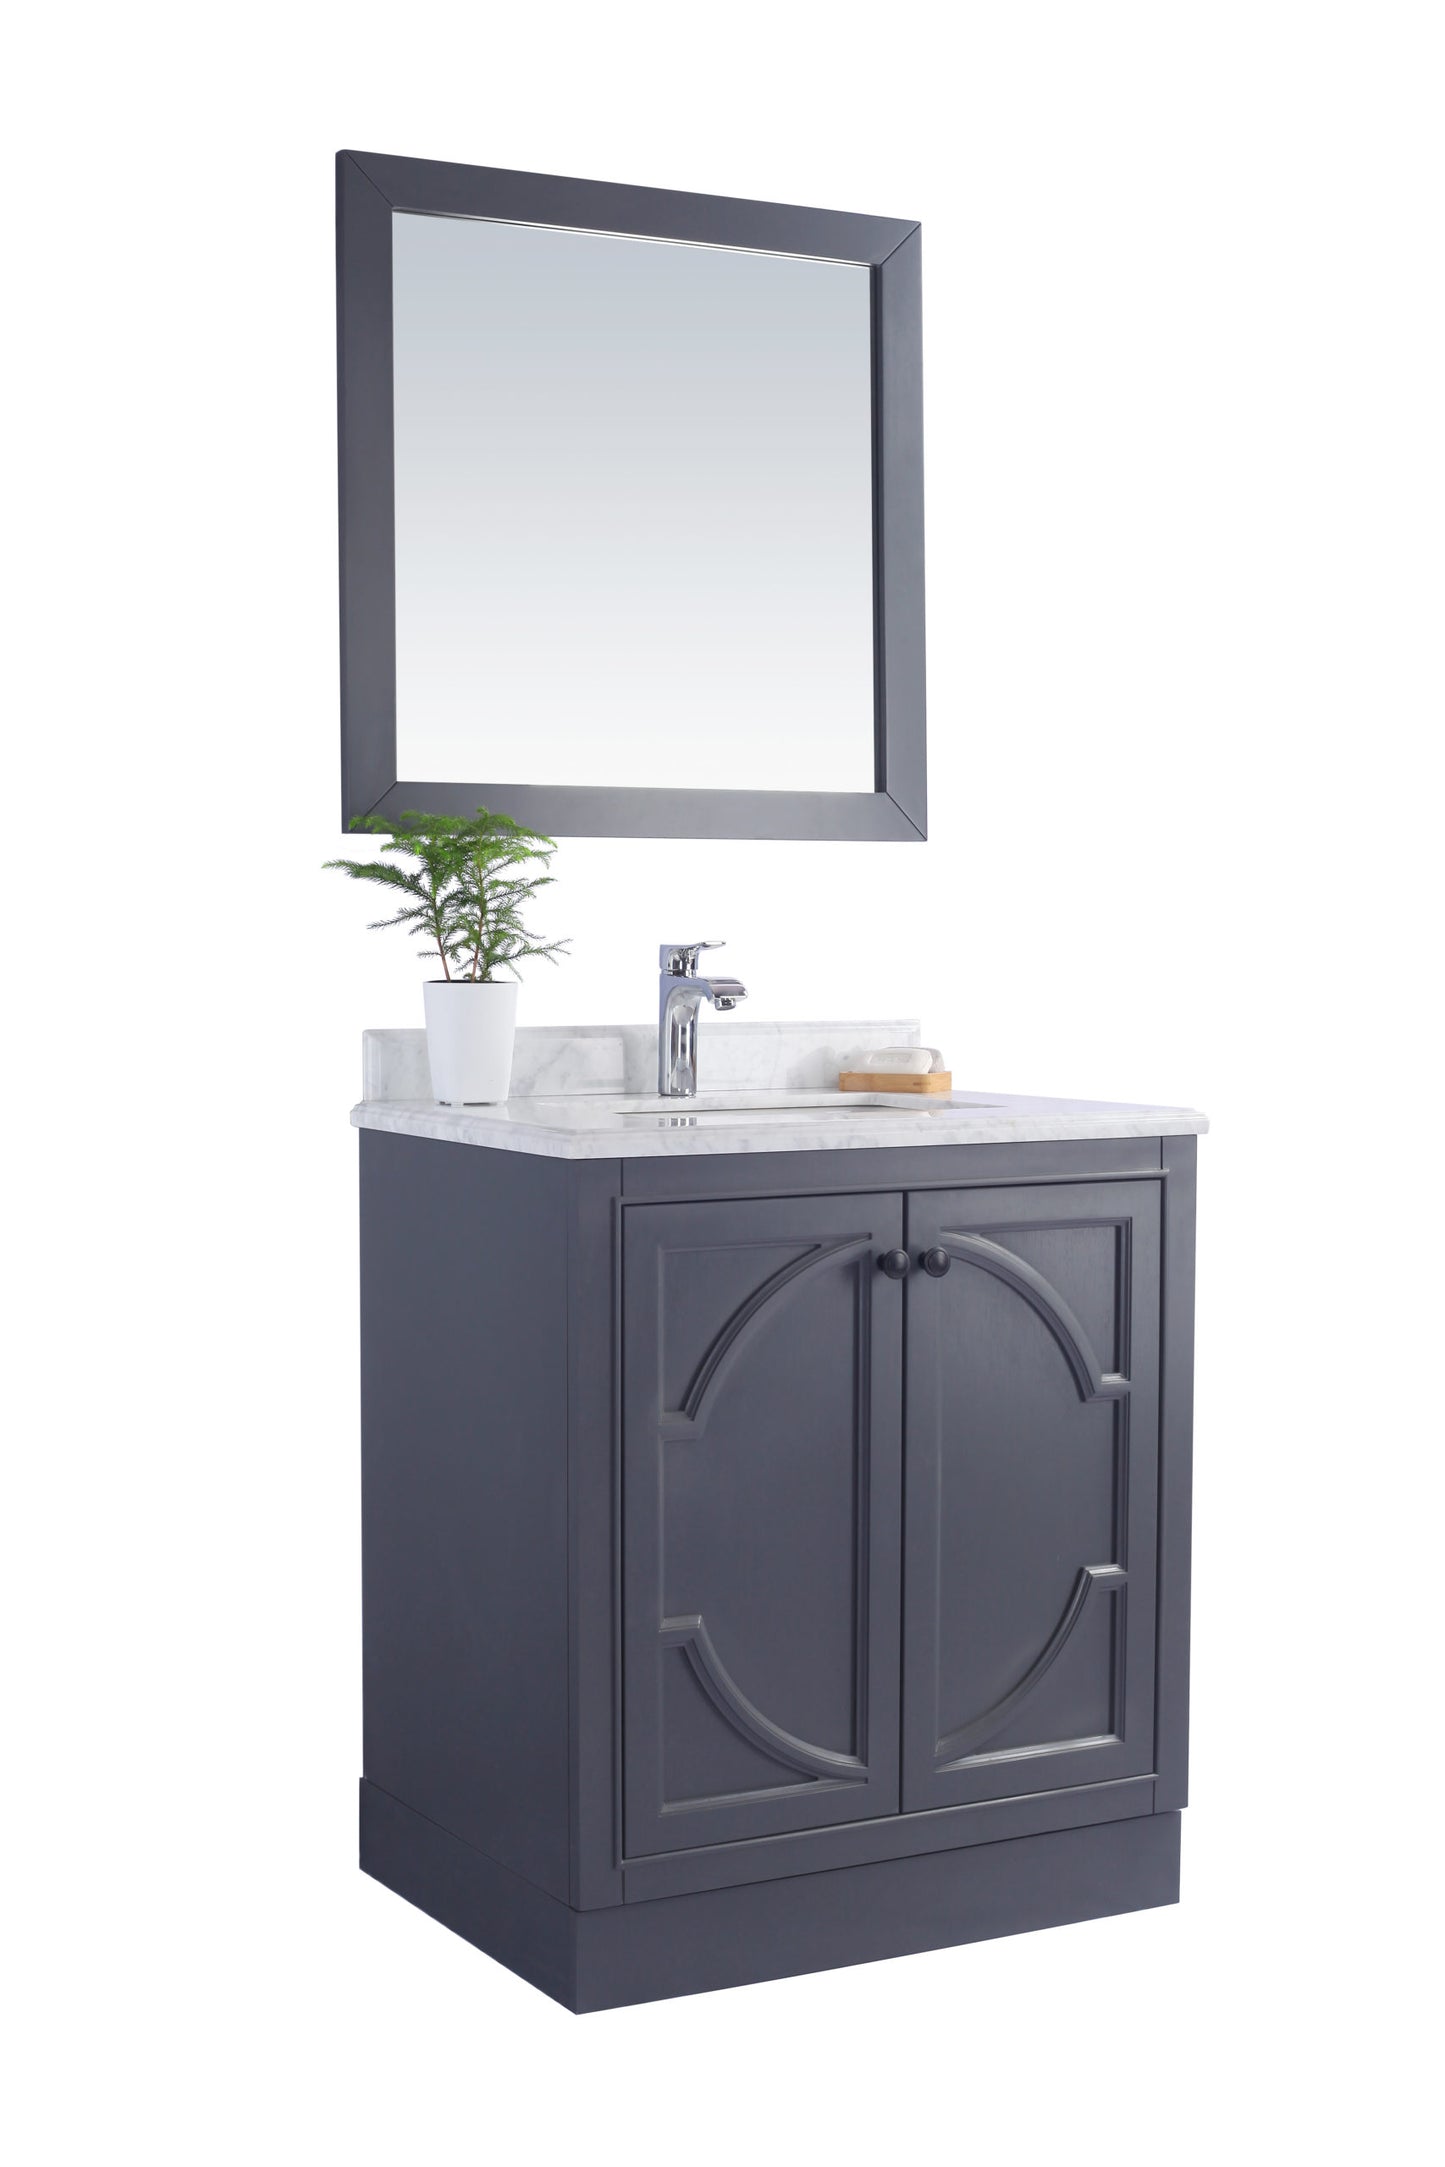 Odyssey 30" Maple Grey Bathroom Vanity with White Stripes Marble Countertop